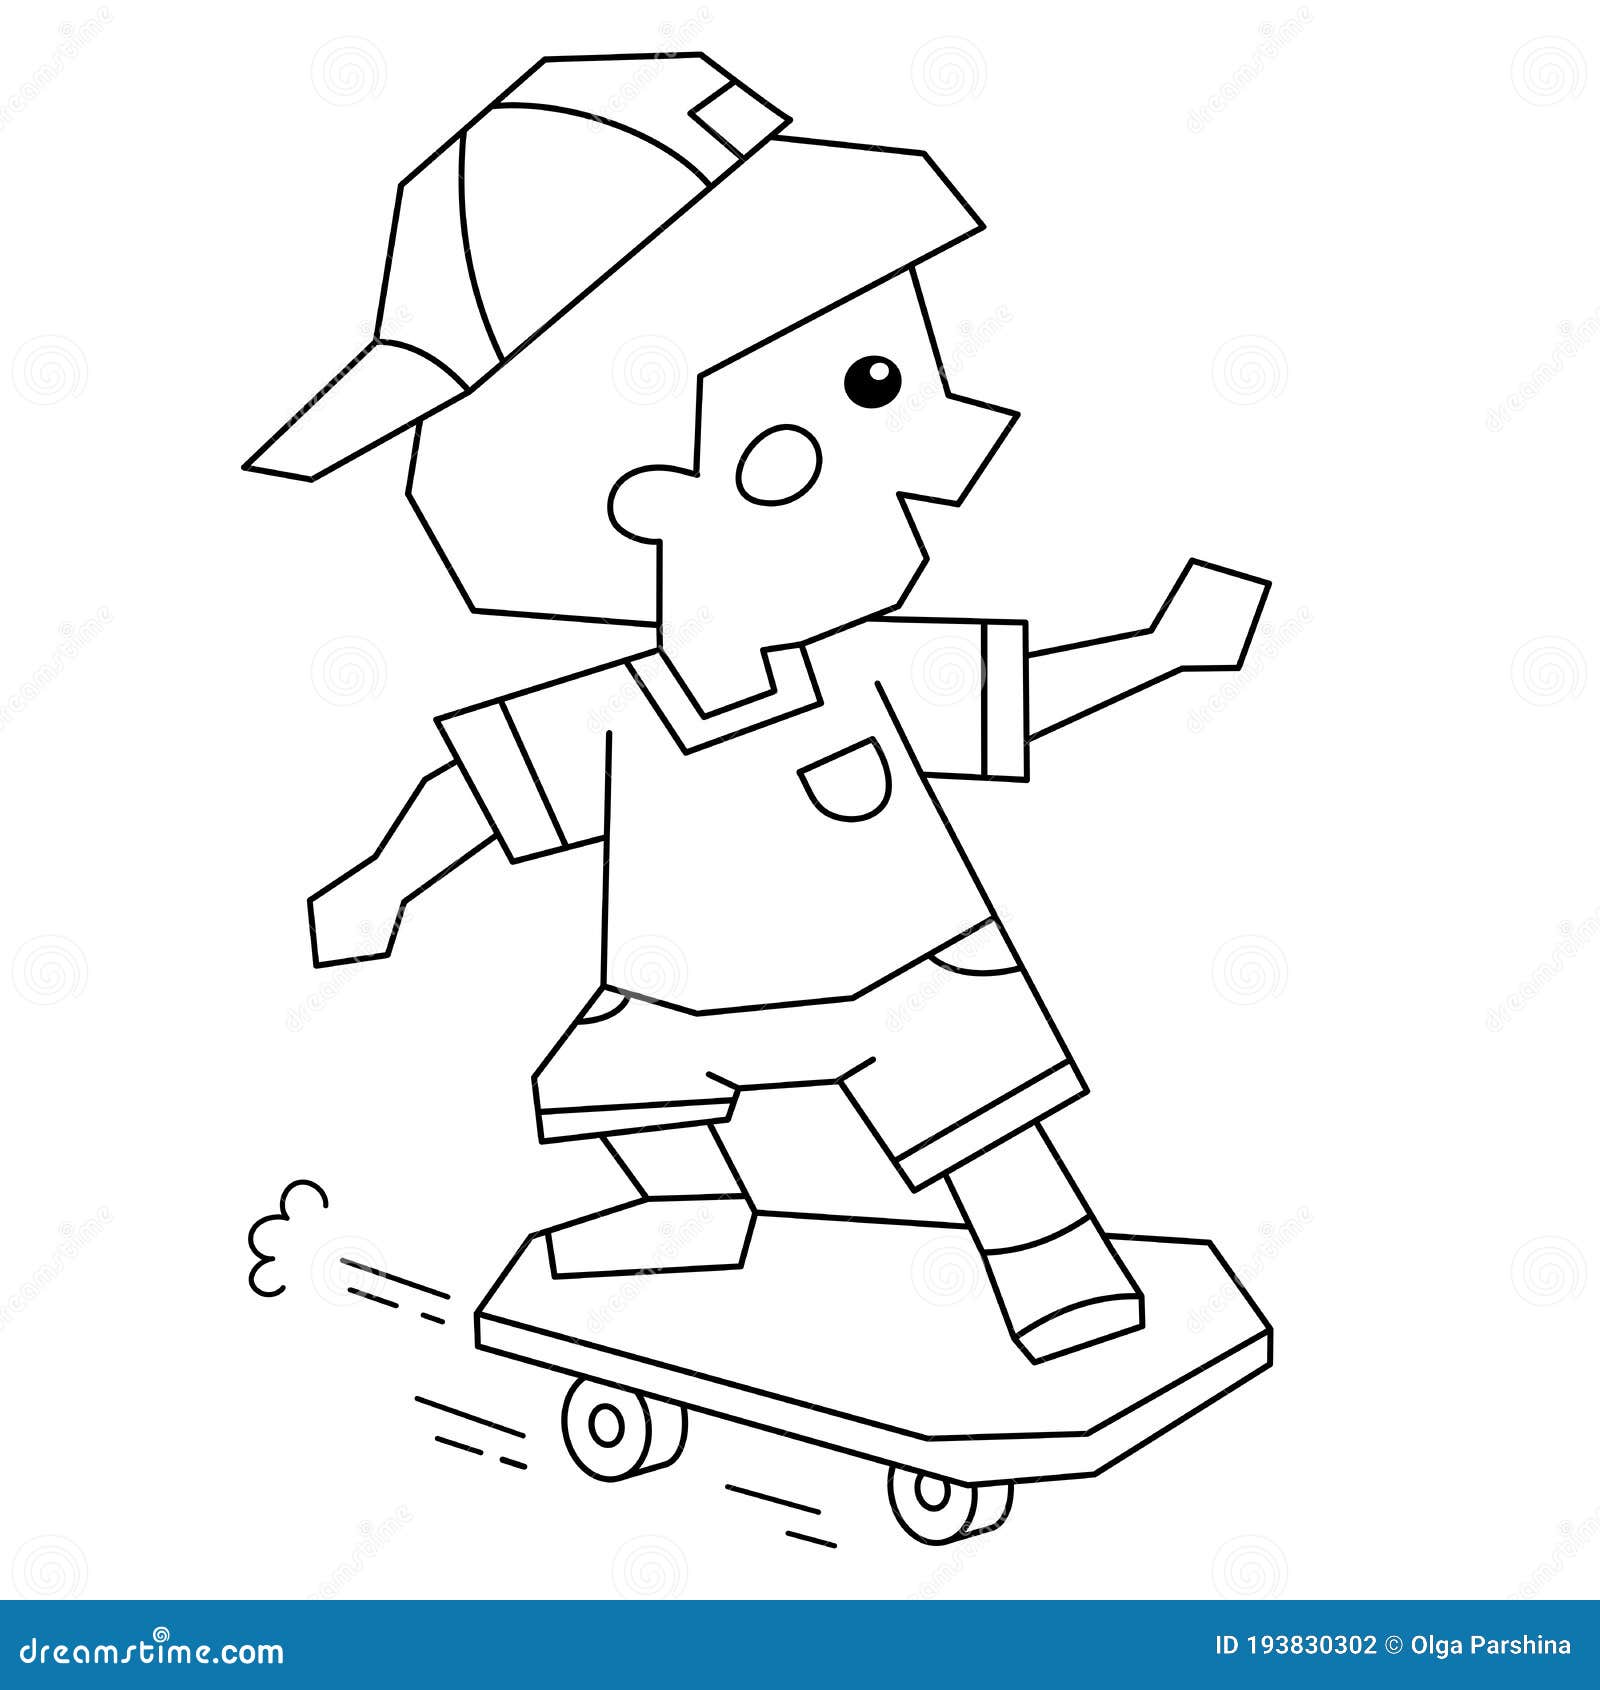 Coloring page outline of cartoon boy on the skateboard coloring book for kids stock vector